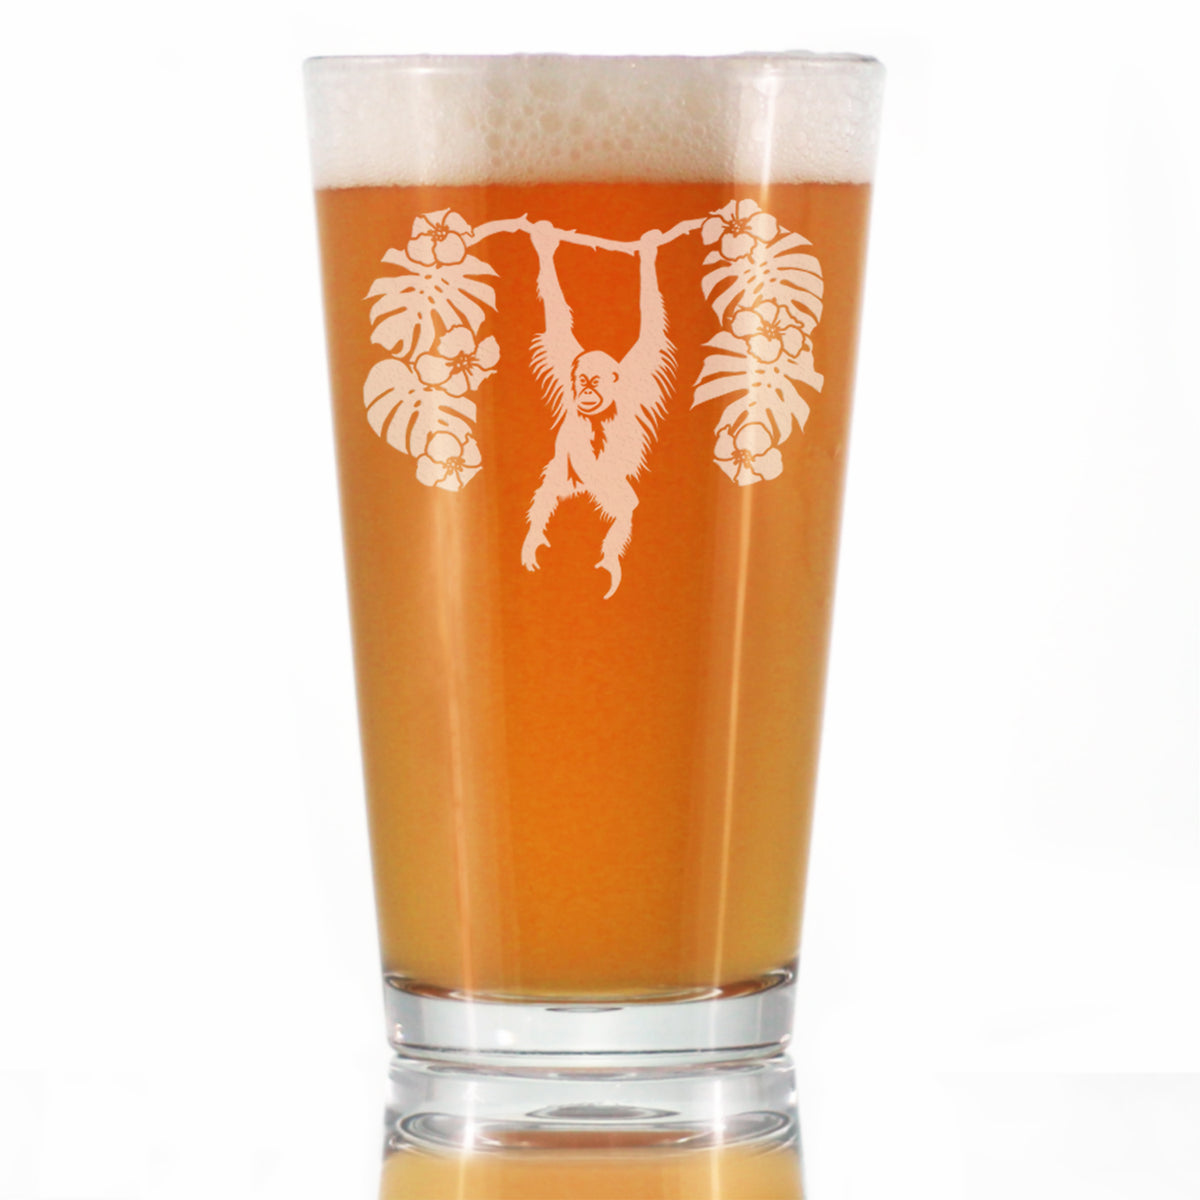 Orangutan Pint Glass for Beer - Fun Wild Animal Themed Decor and Gifts for Lovers of Apes and Monkeys - 16 Oz Glasses